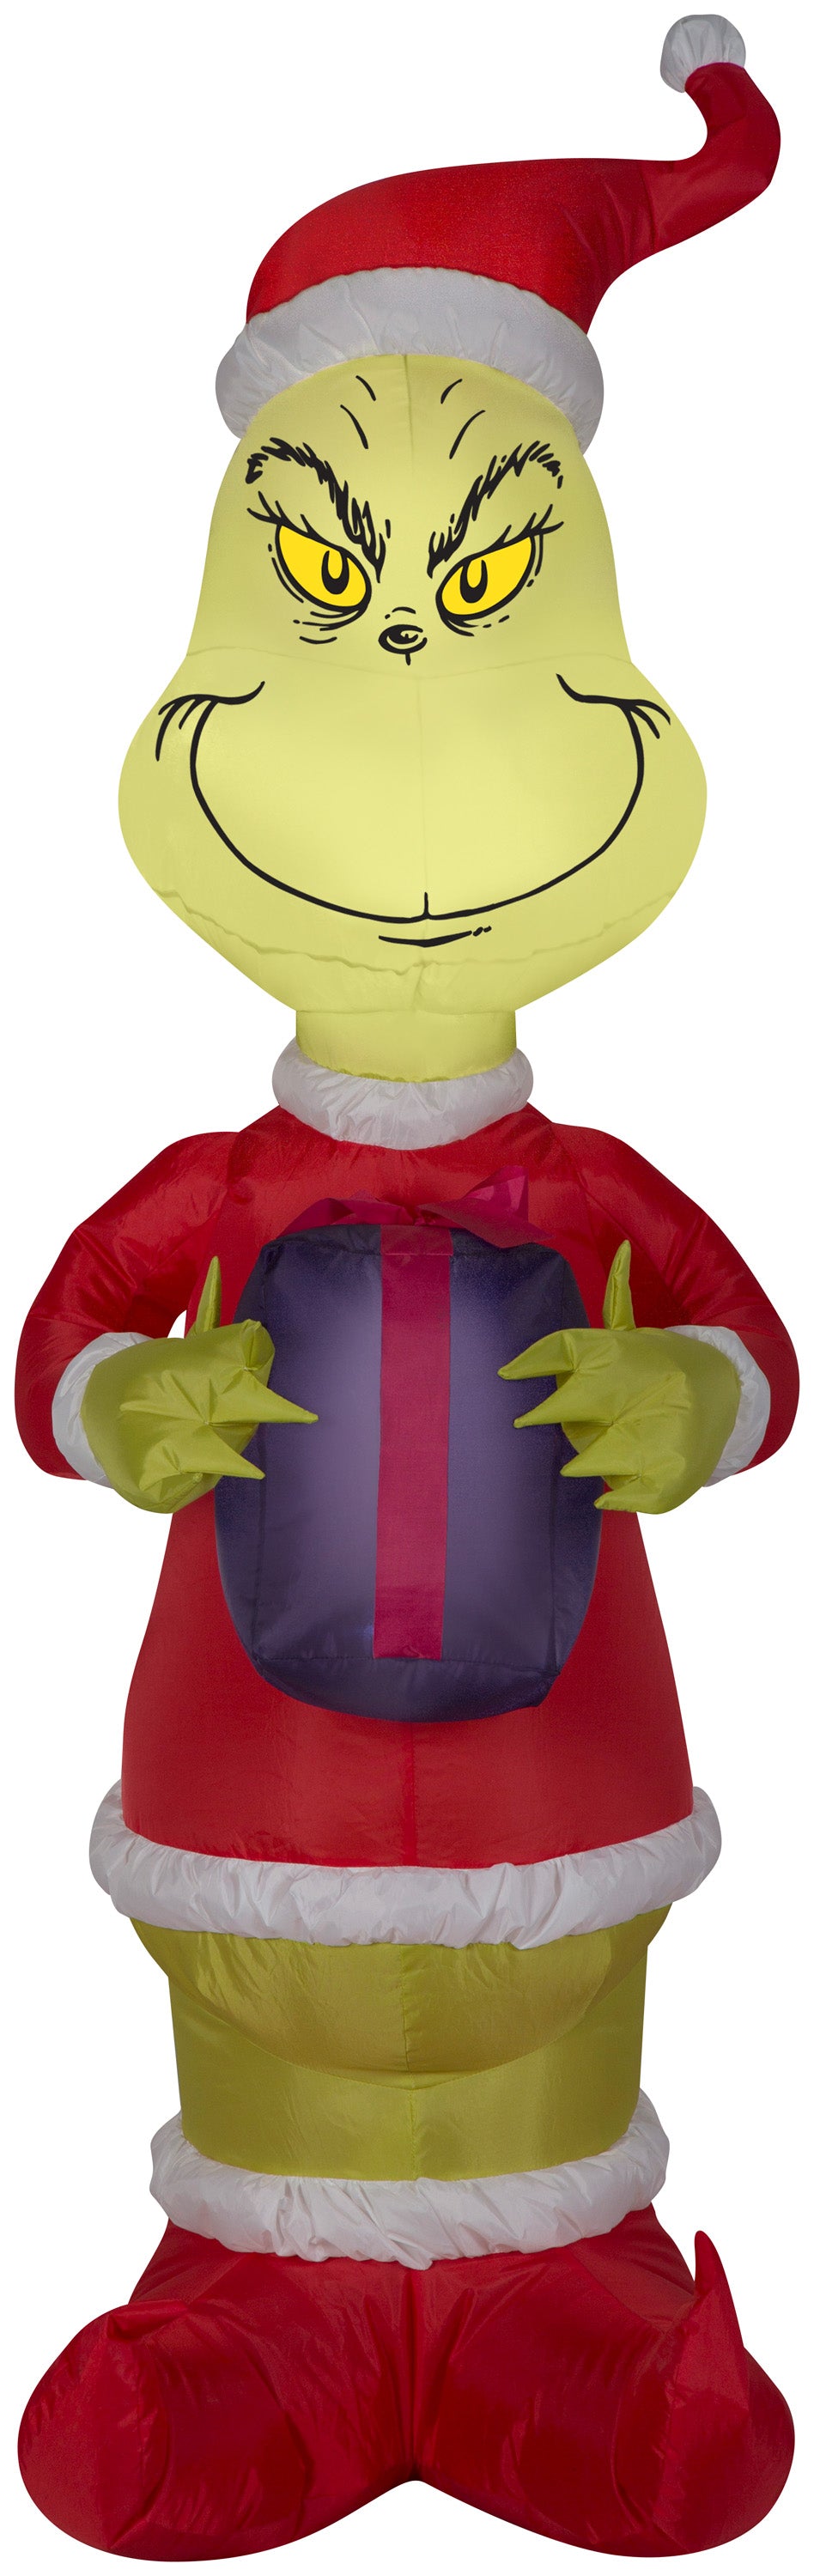 Gemmy Christmas Airblown Inflatable Grinch w/Present Dr. Seuss, 4 ft Tall, Multicolored